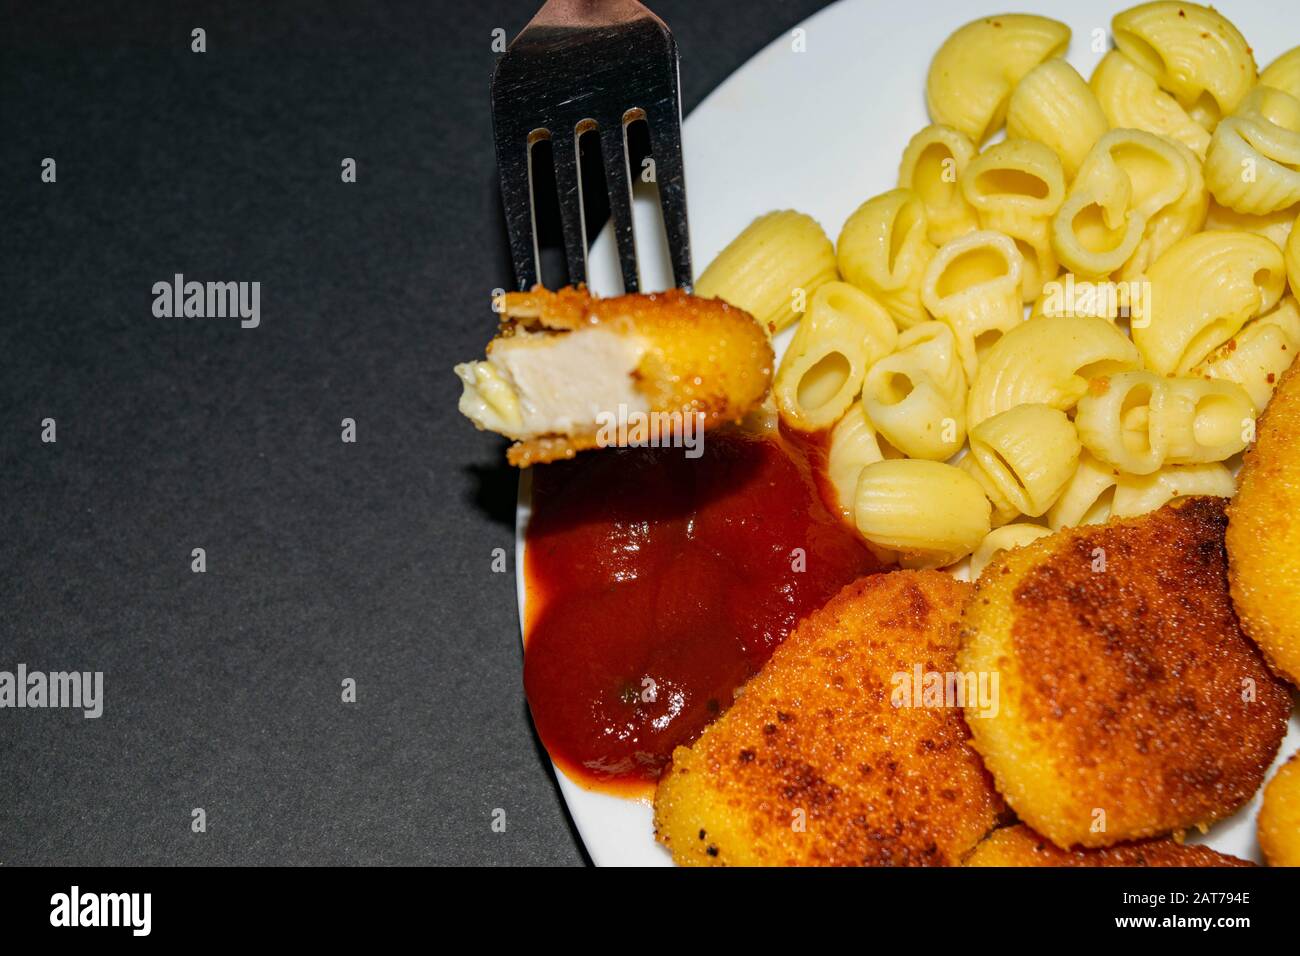 A piece of nuggets on a fork and a white plate with fried chicken nuggets, pasta and ketchup on a dark background. Close up Stock Photo